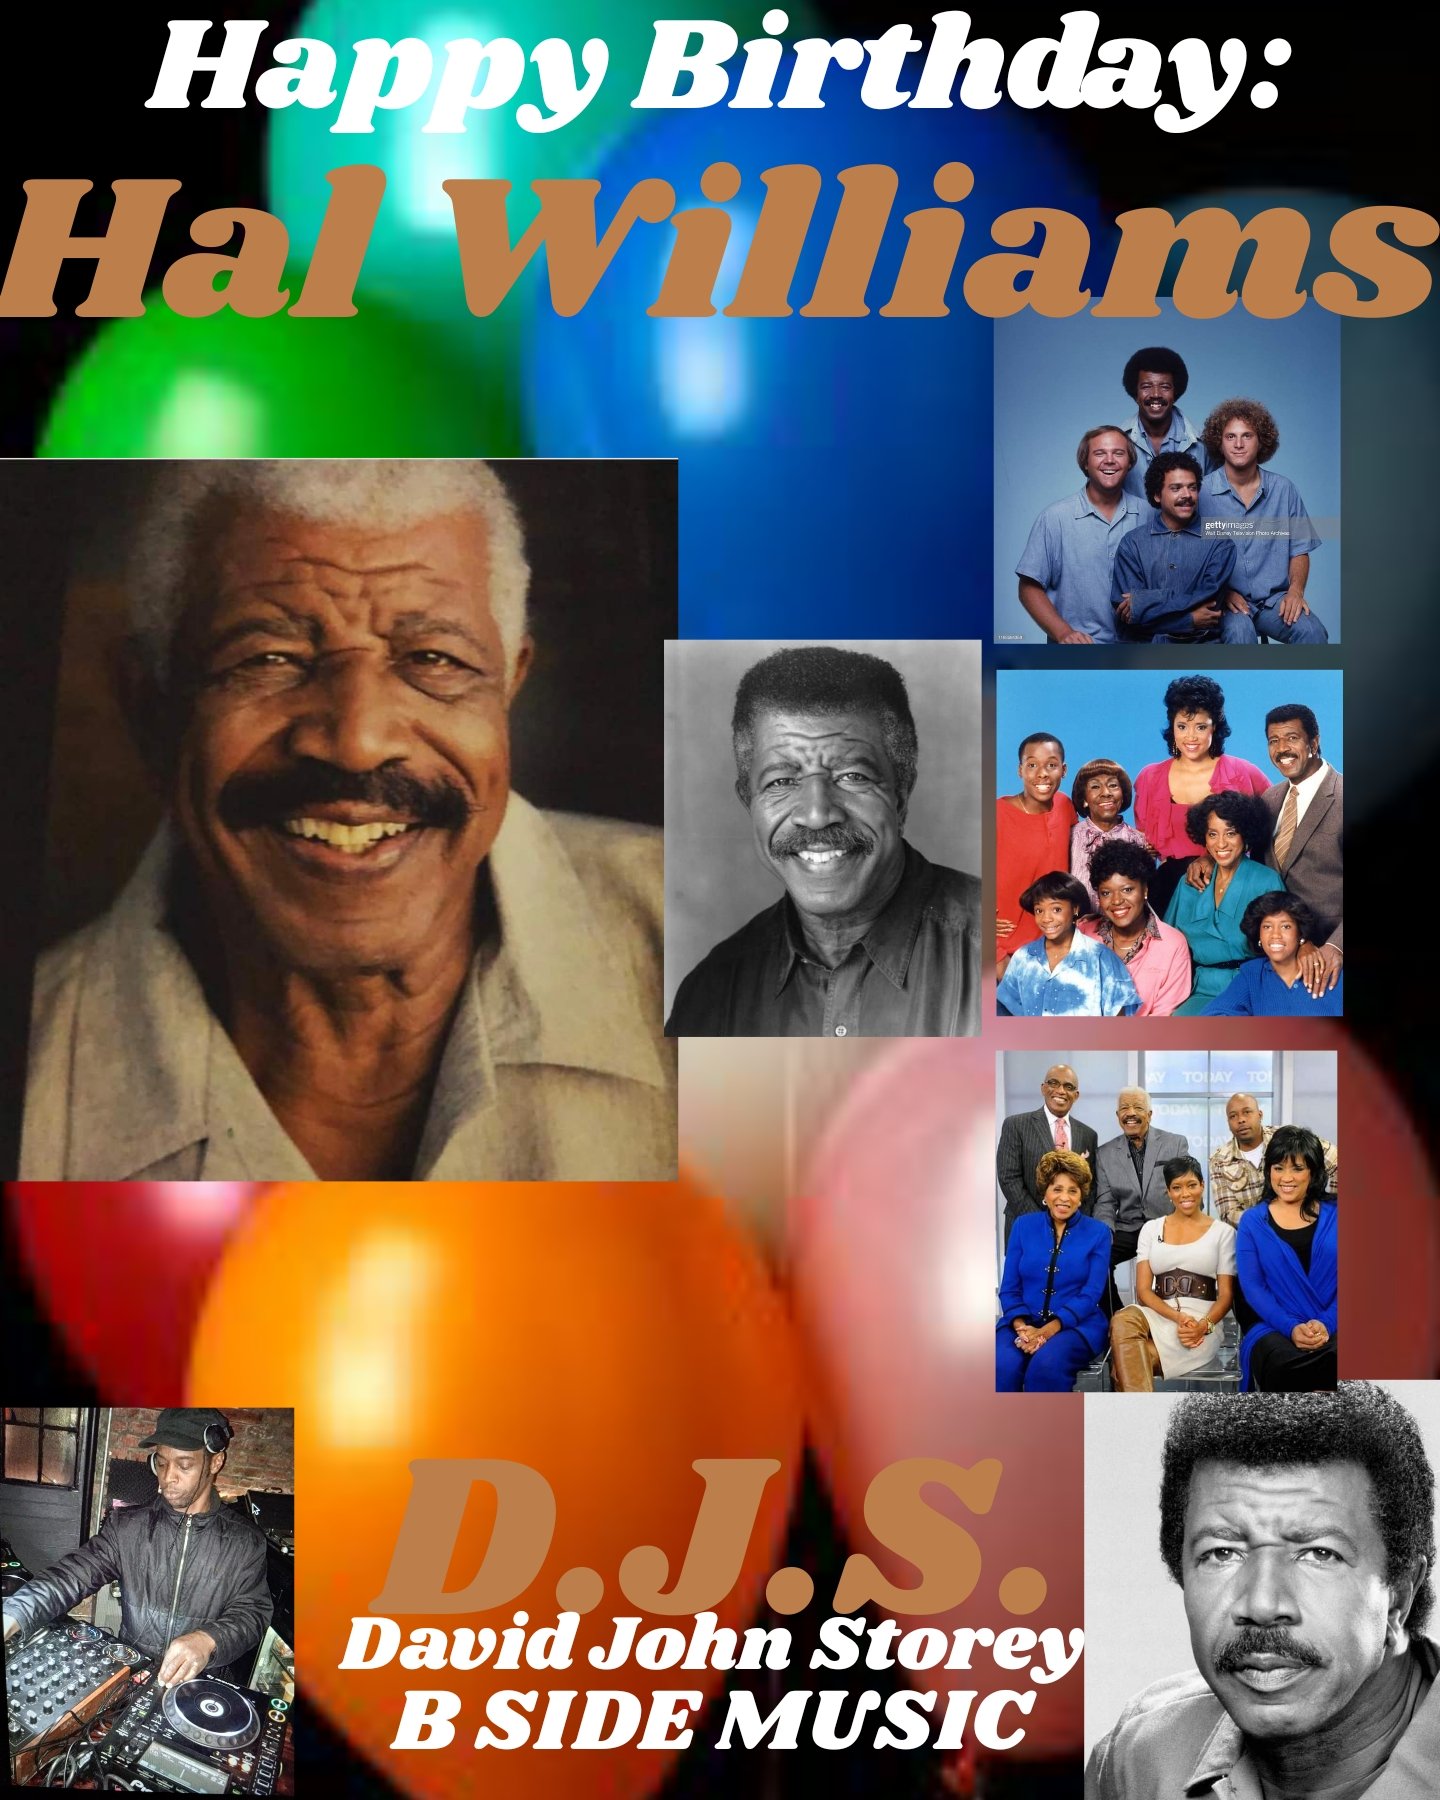 I(D.J.S.)\"B SIDE\" taking time to say Happy Birthday to Actor: \"HAL WILLIAMS\"!!! 